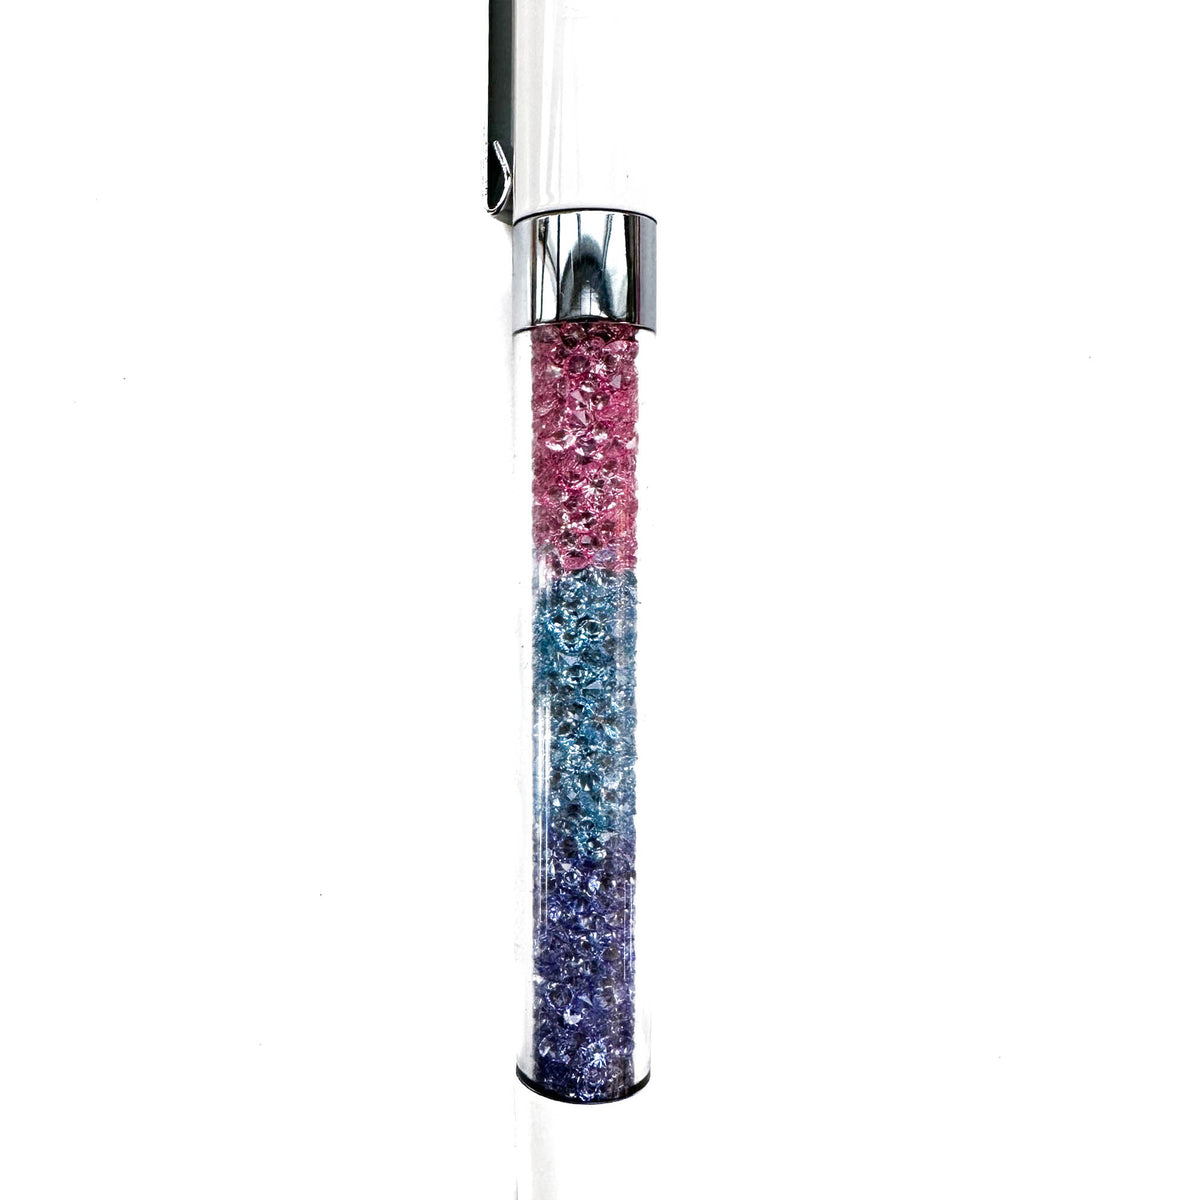 Candy Floss Crystal VBPen | limited pen